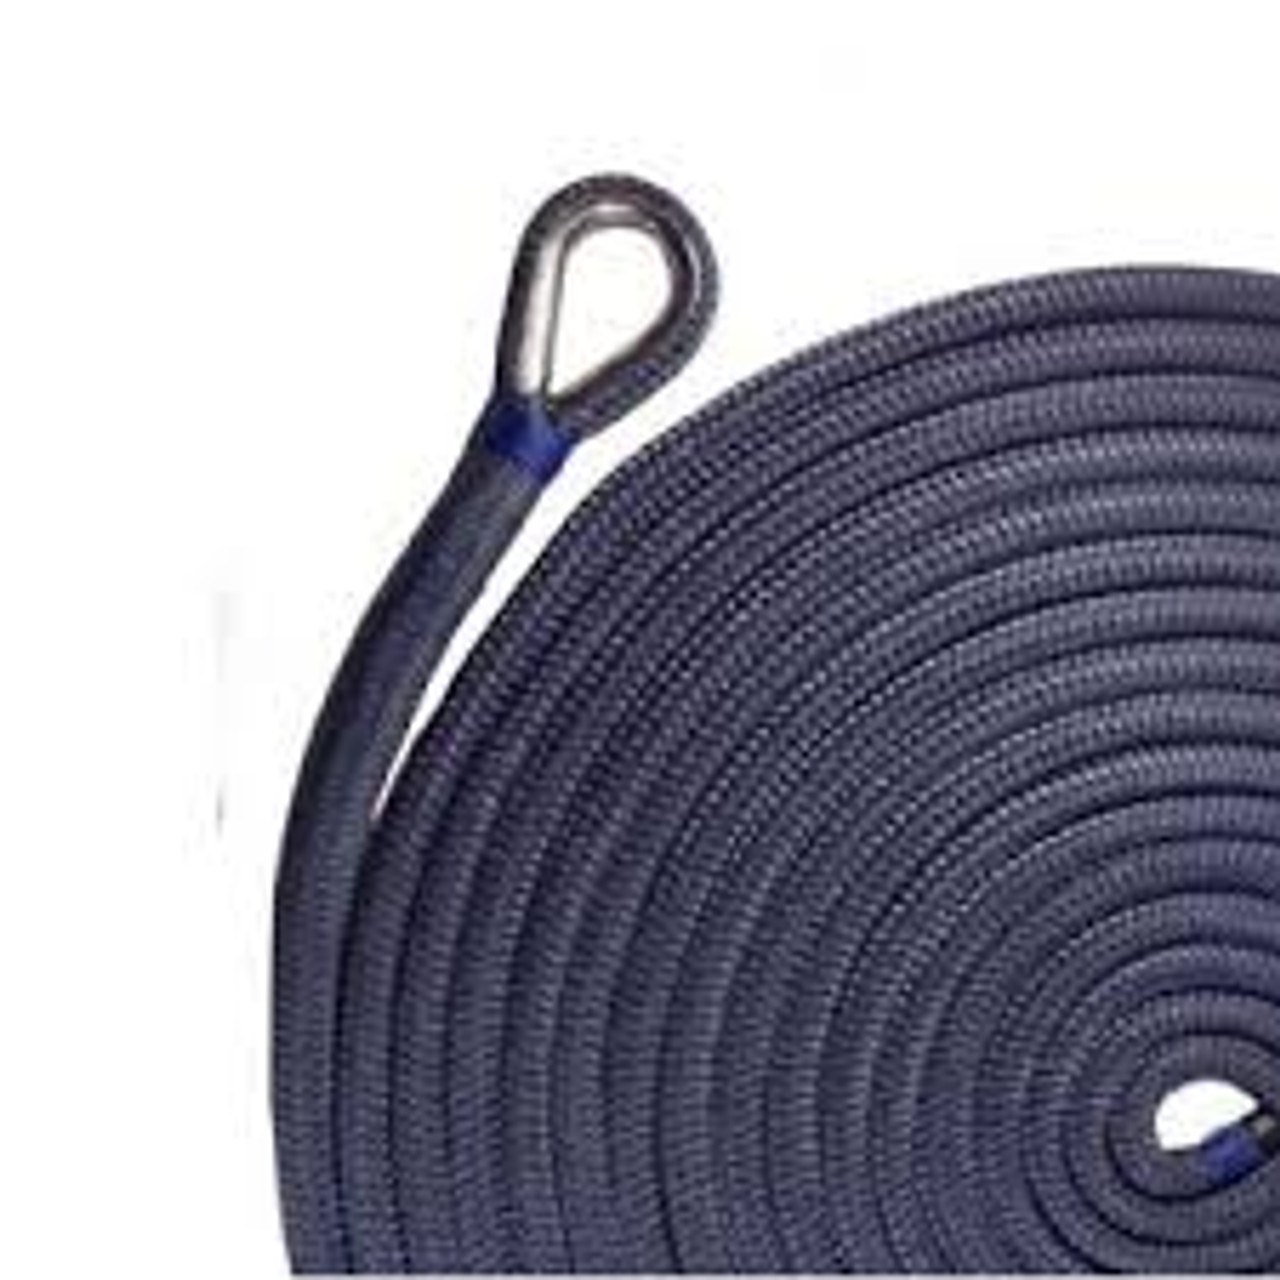 US Ropes Nylon Double Braided Anchor Line 3/8 x 100' Navy - US Stainless